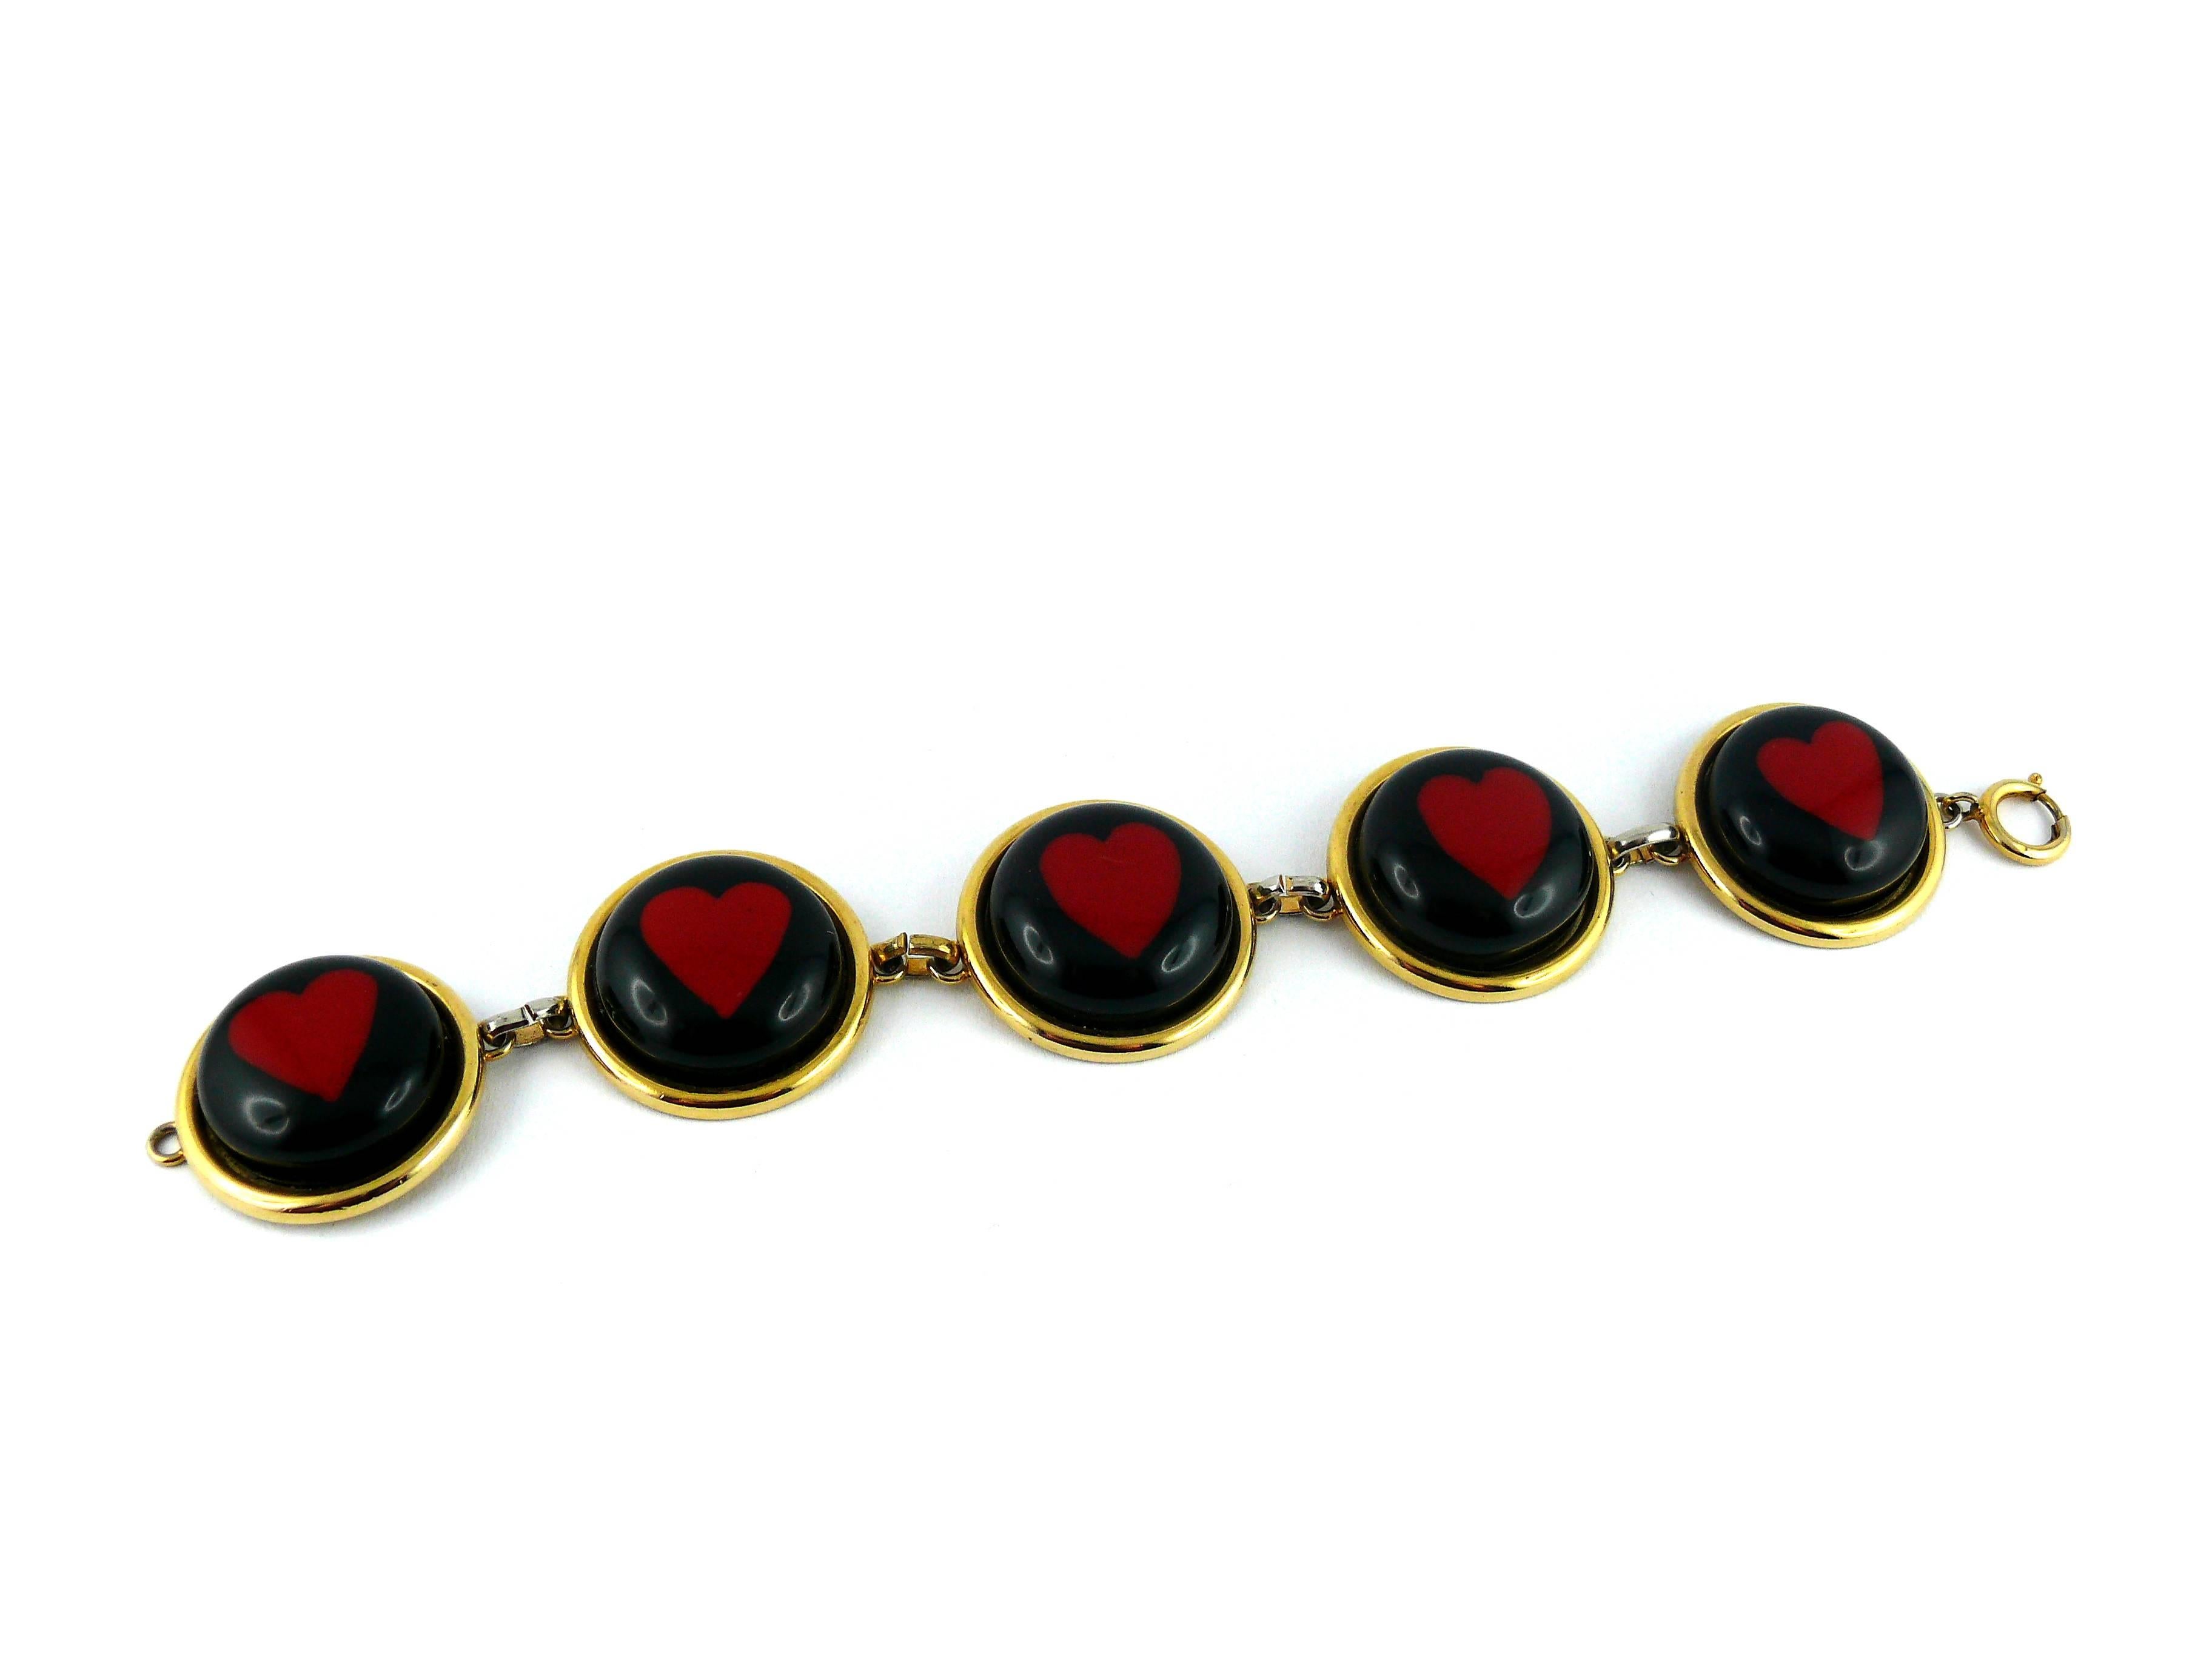 MOSCHINO vintage rare bracelet by UGO CORREANI featuring 5 black and red lucite heart medallions.

Embossed MOSCHINO.

JEWELRY CONDITION CHART
- New or never worn : item is in pristine condition with no noticeable imperfections
- Excellent : item